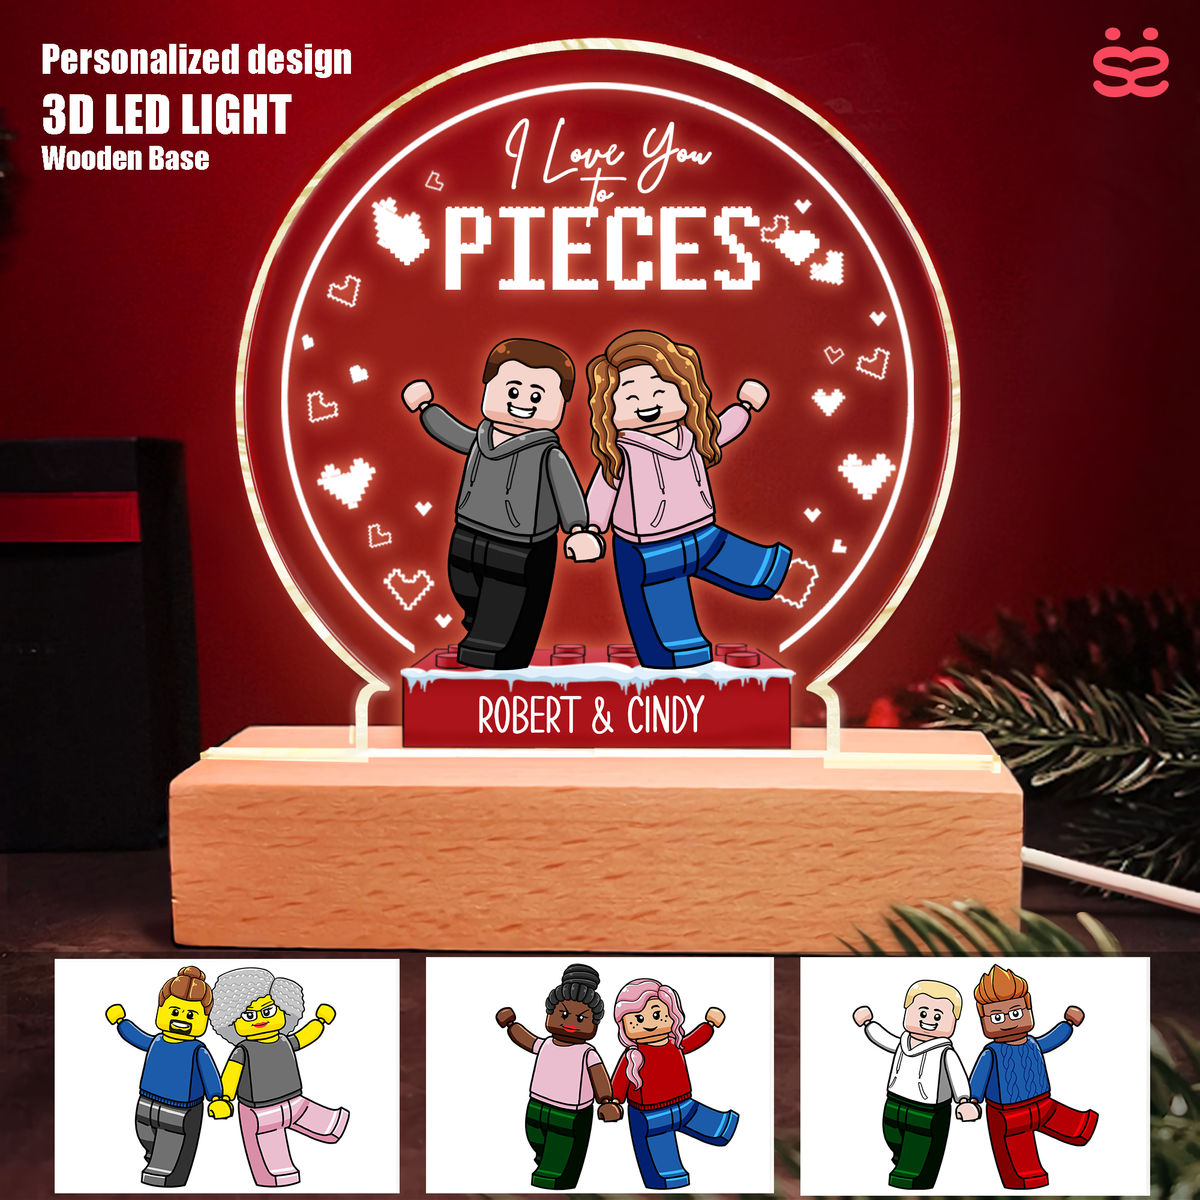 Valentine Gift for Sweetheart - I love you to pieces - Personalized 3D LED Light Wooden Base (2401)